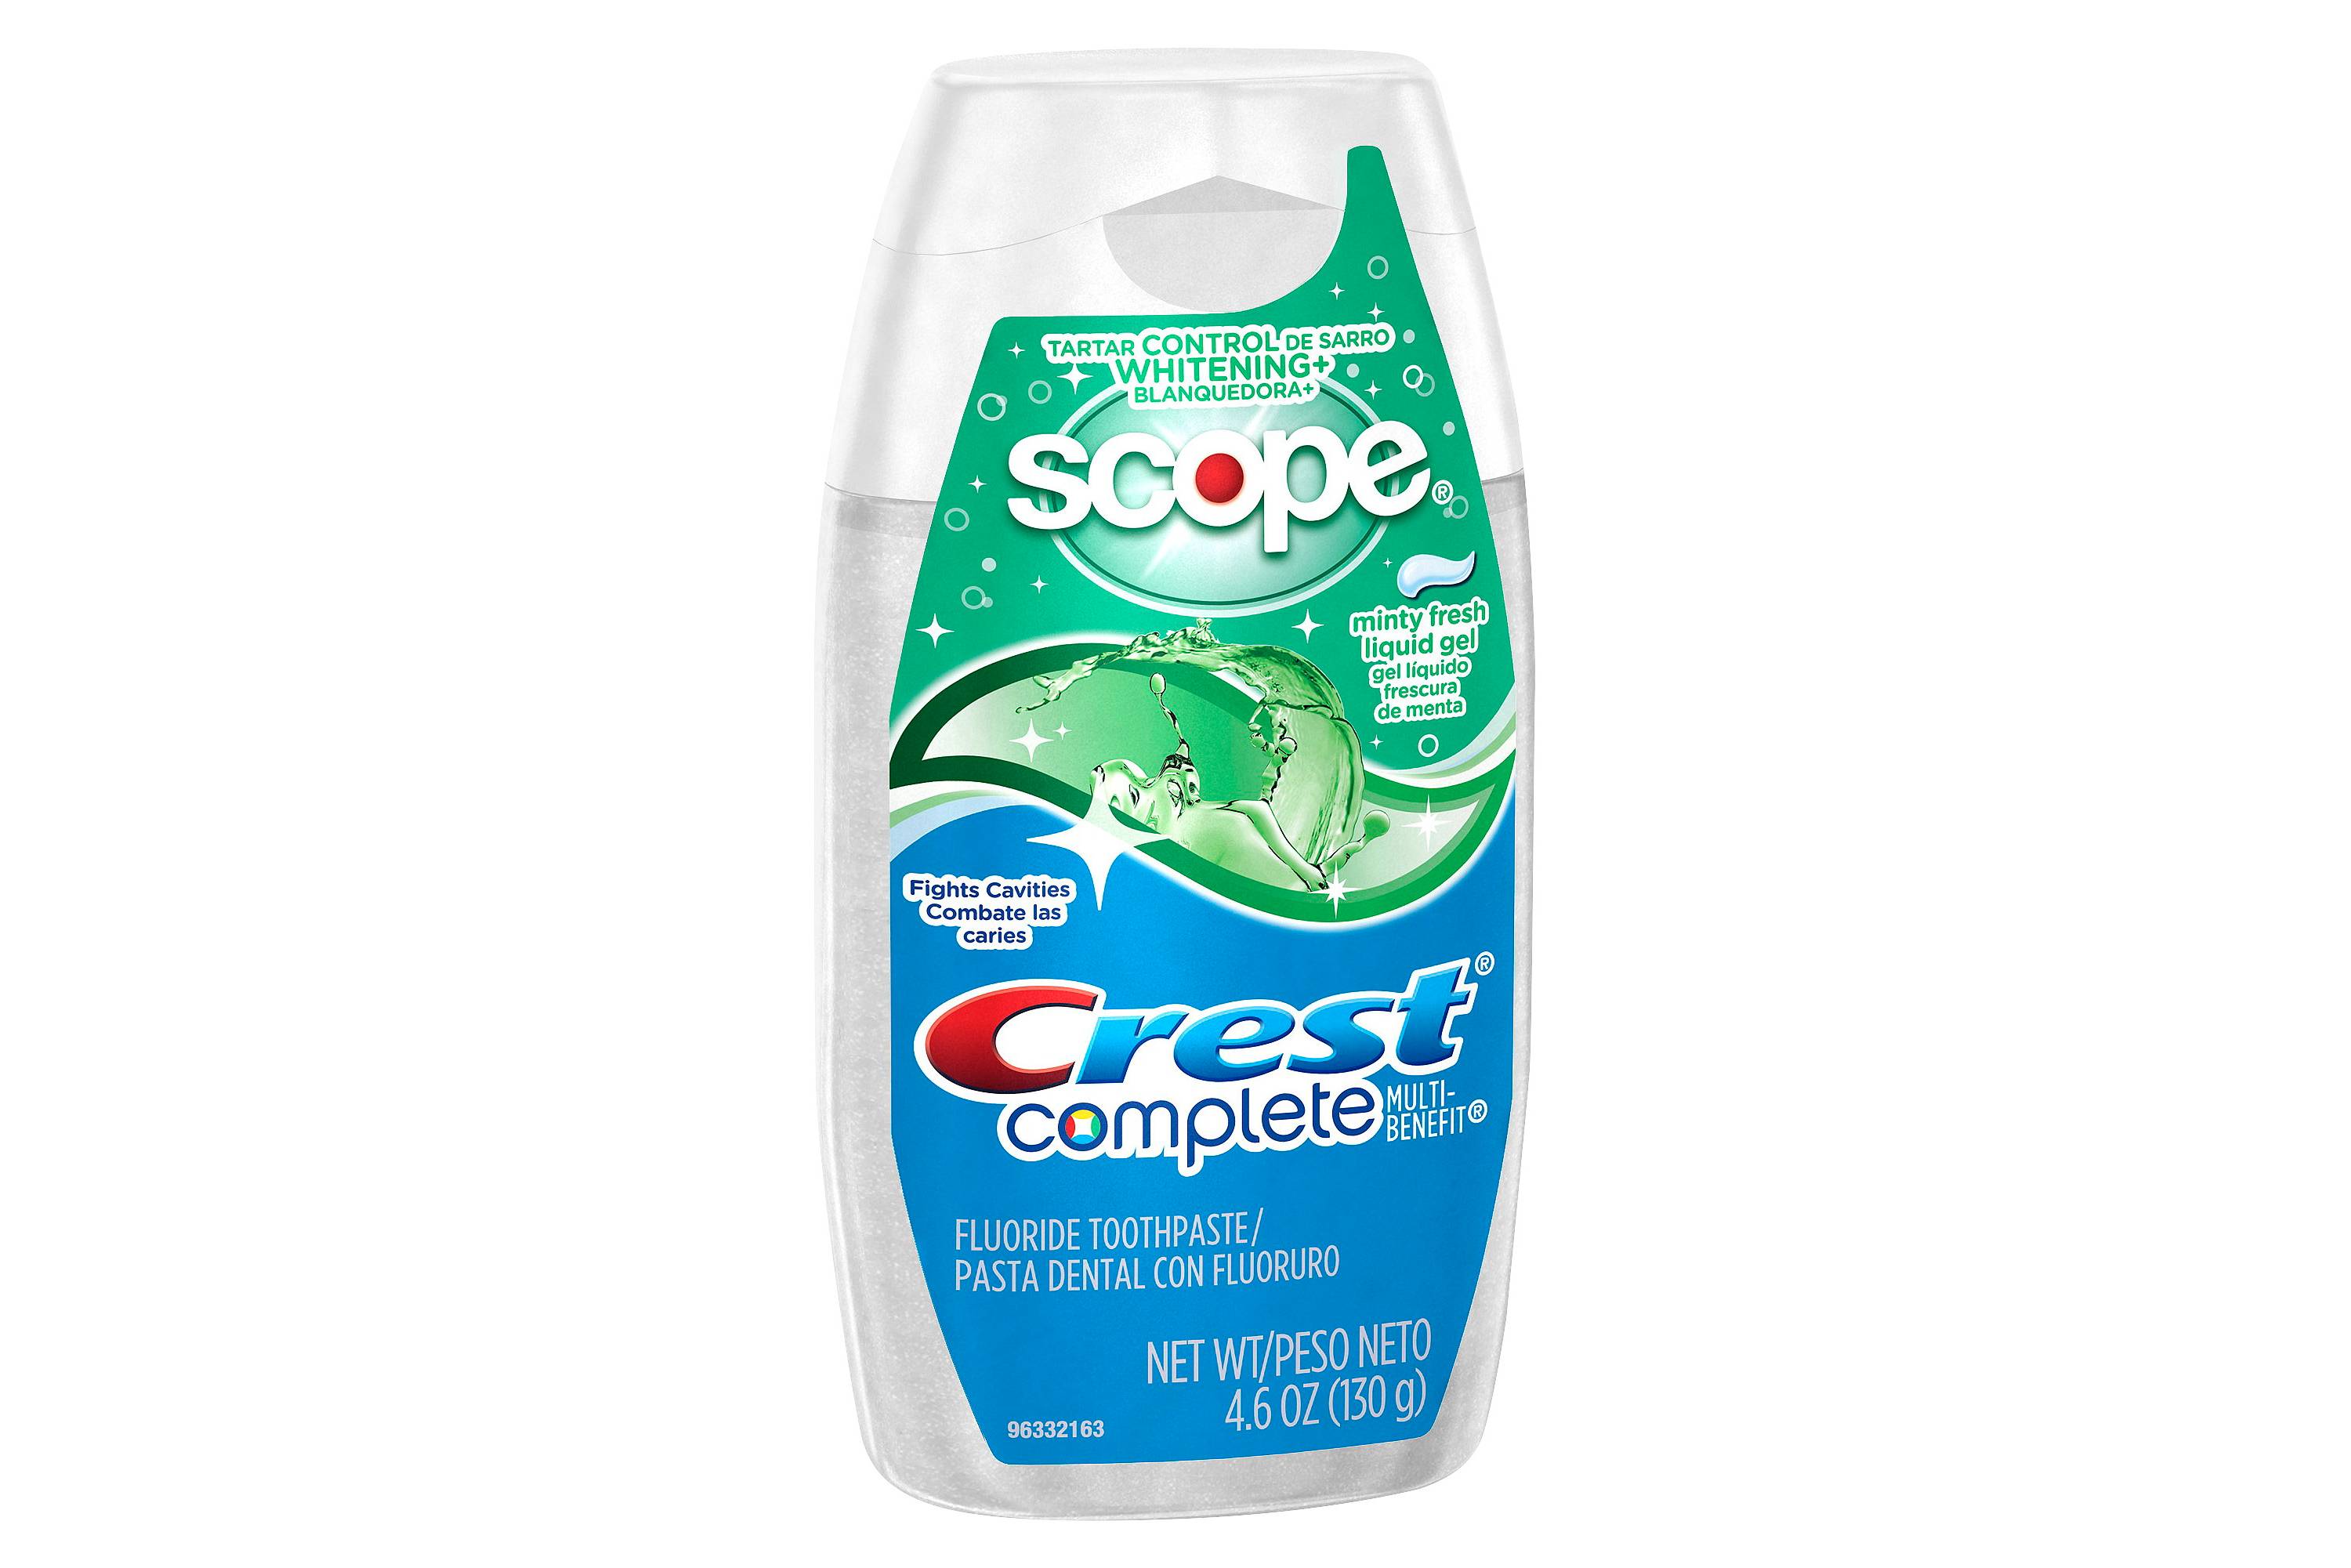 Prime members: Crest Complete whitening toothpaste with Scope for $0.69